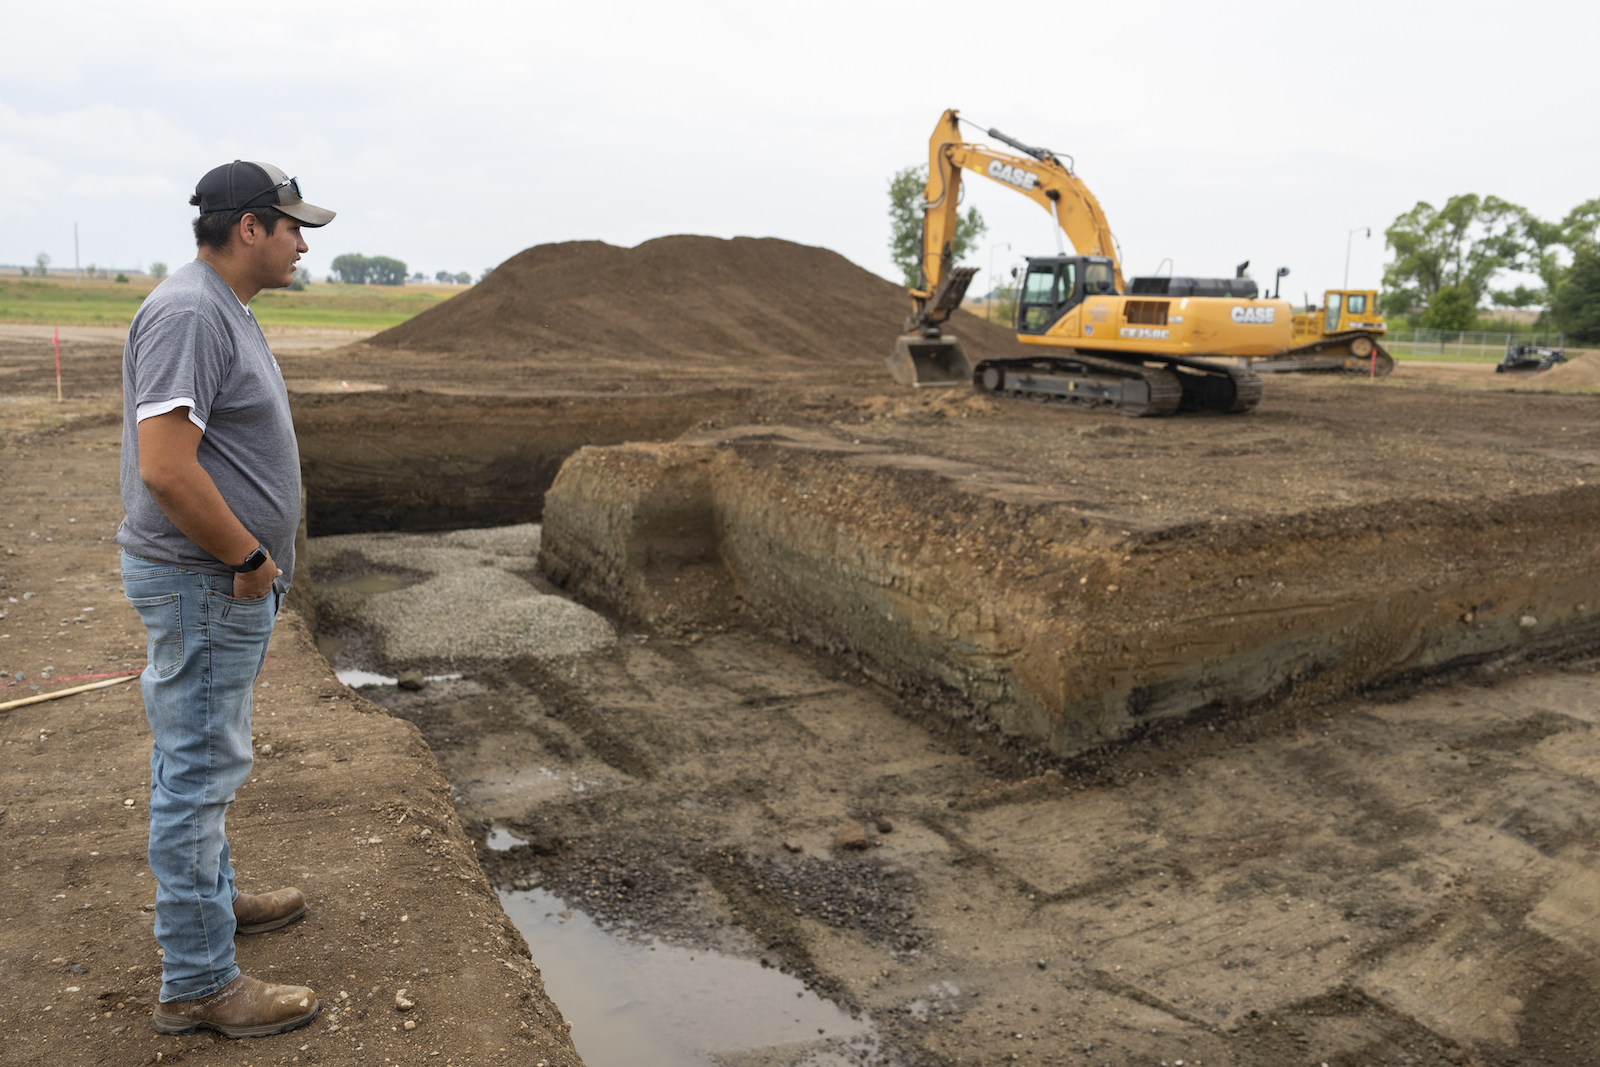 Joey Goodthunder, whose primary job is growing the tribe’s hemp, looks over the beginnings of a foundation for a building to house the tribe's processing equipment.